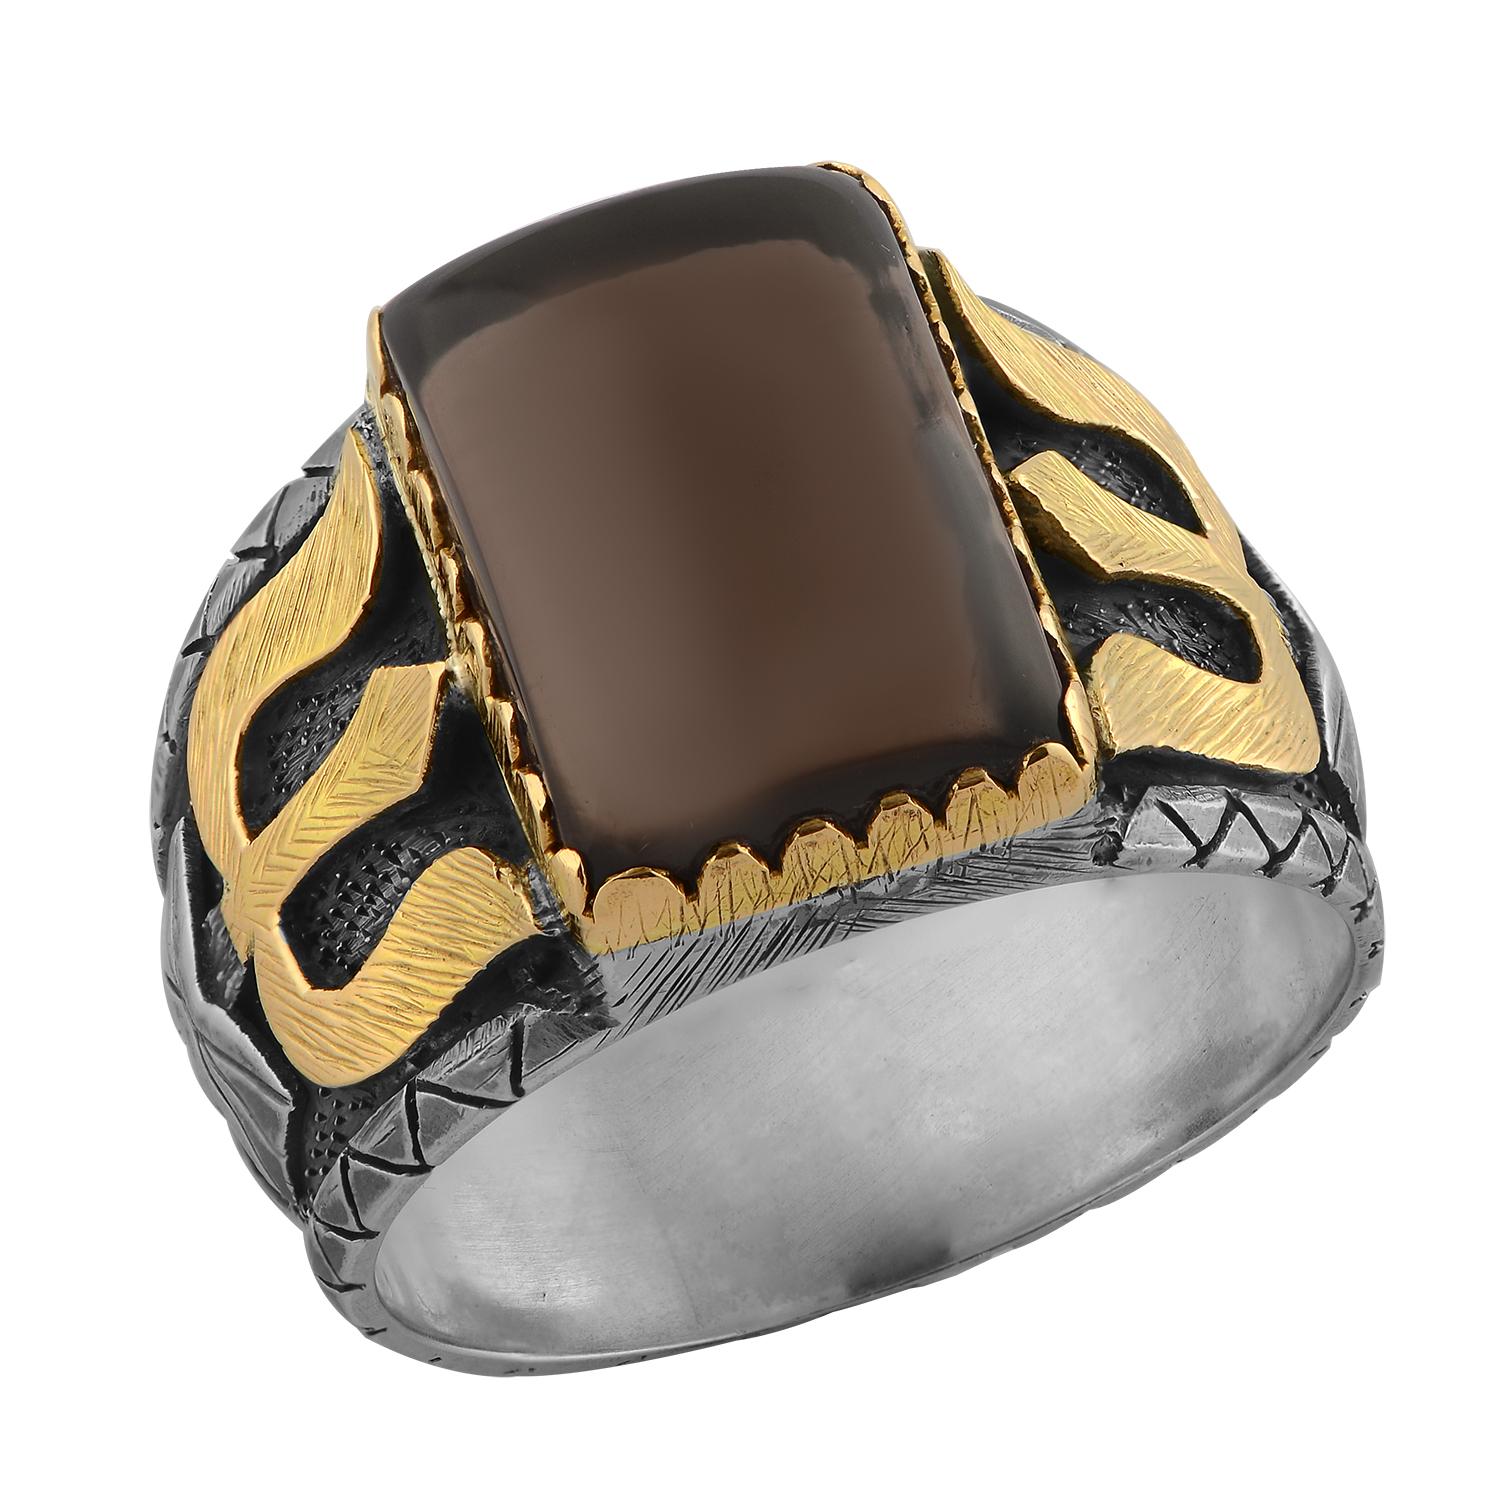 This statement men's ring has been handmade in our workshops. It features a central smokey topaz gemstones, which is set in 18k gold. The ring band is made of oxidized sterling silver, which has been hand engraved, and overlaid with 18k gold